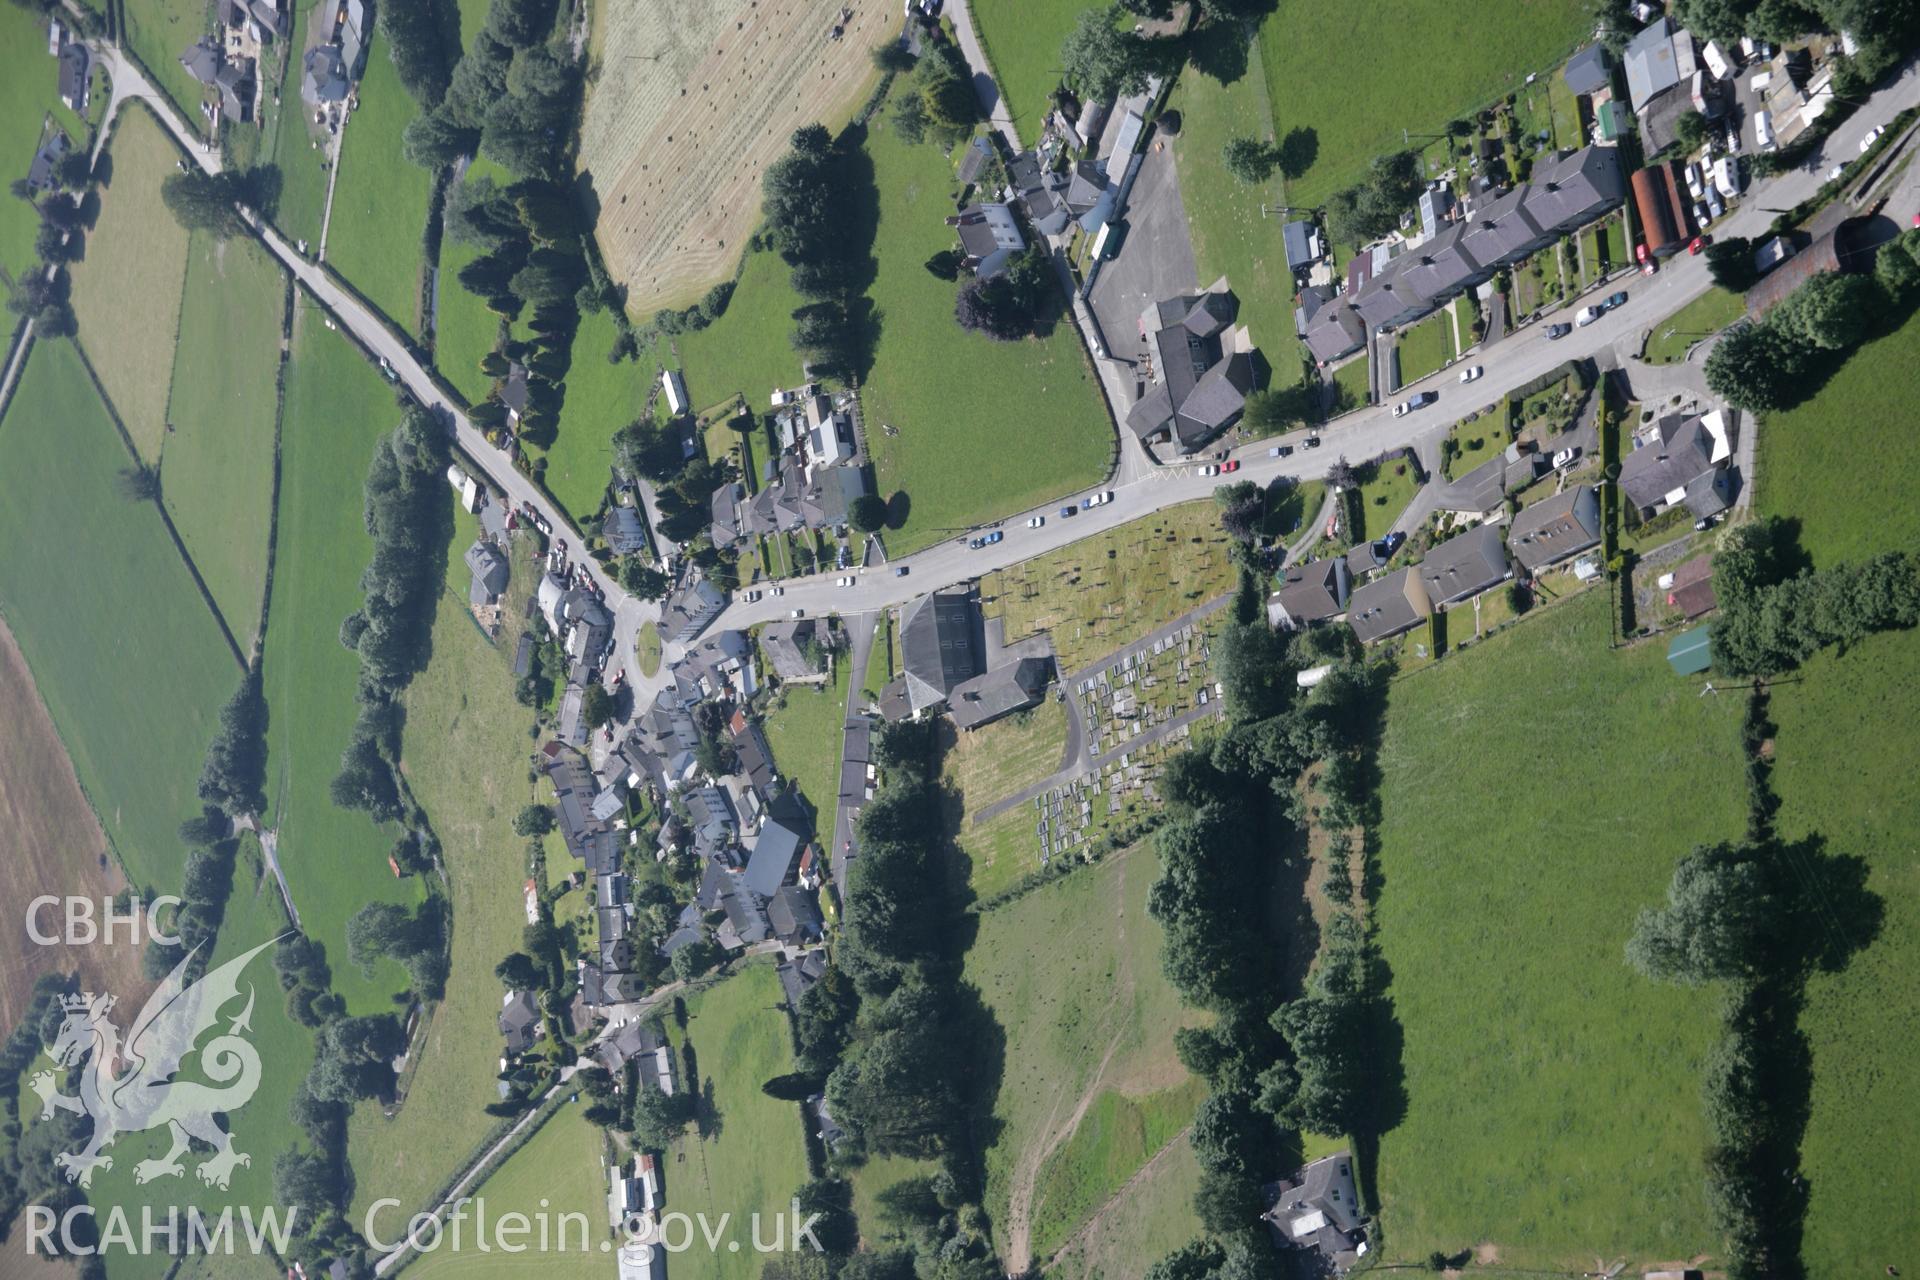 RCAHMW colour oblique aerial photograph of Llangeitho village, genral view from the north-east. Taken on 23 June 2005 by Toby Driver